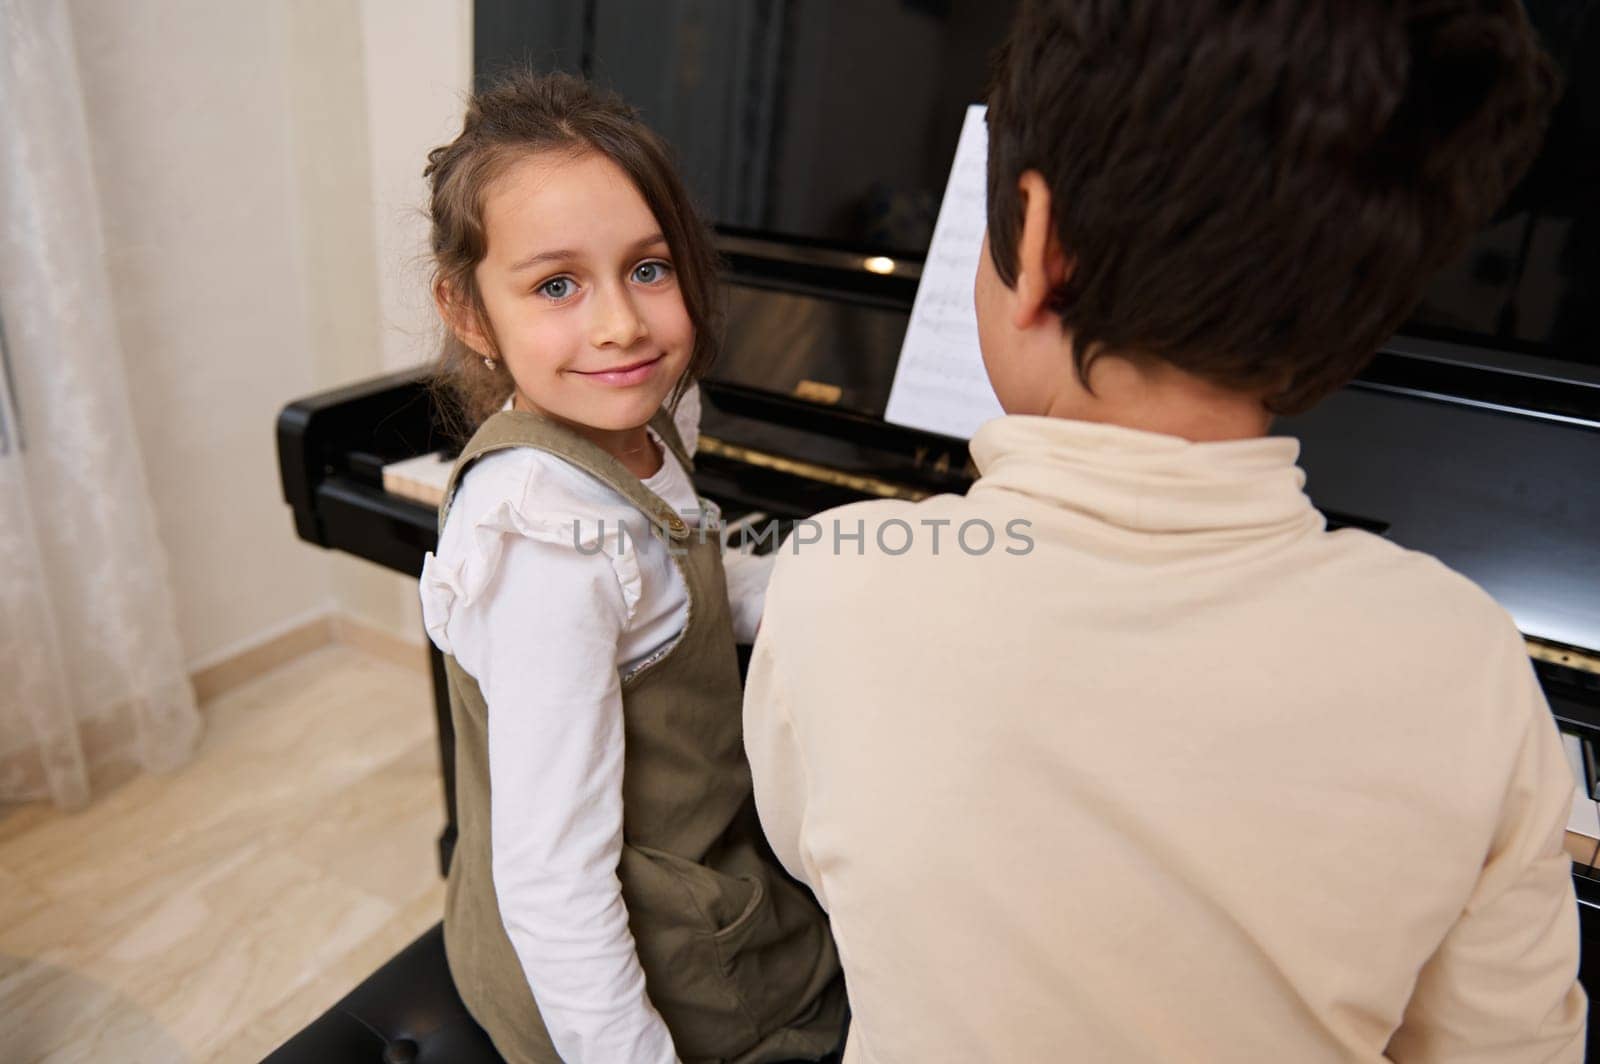 Handsome kids pianists playing grand piano, smiling looking at the camera. People. Culture. Arts. Education by artgf